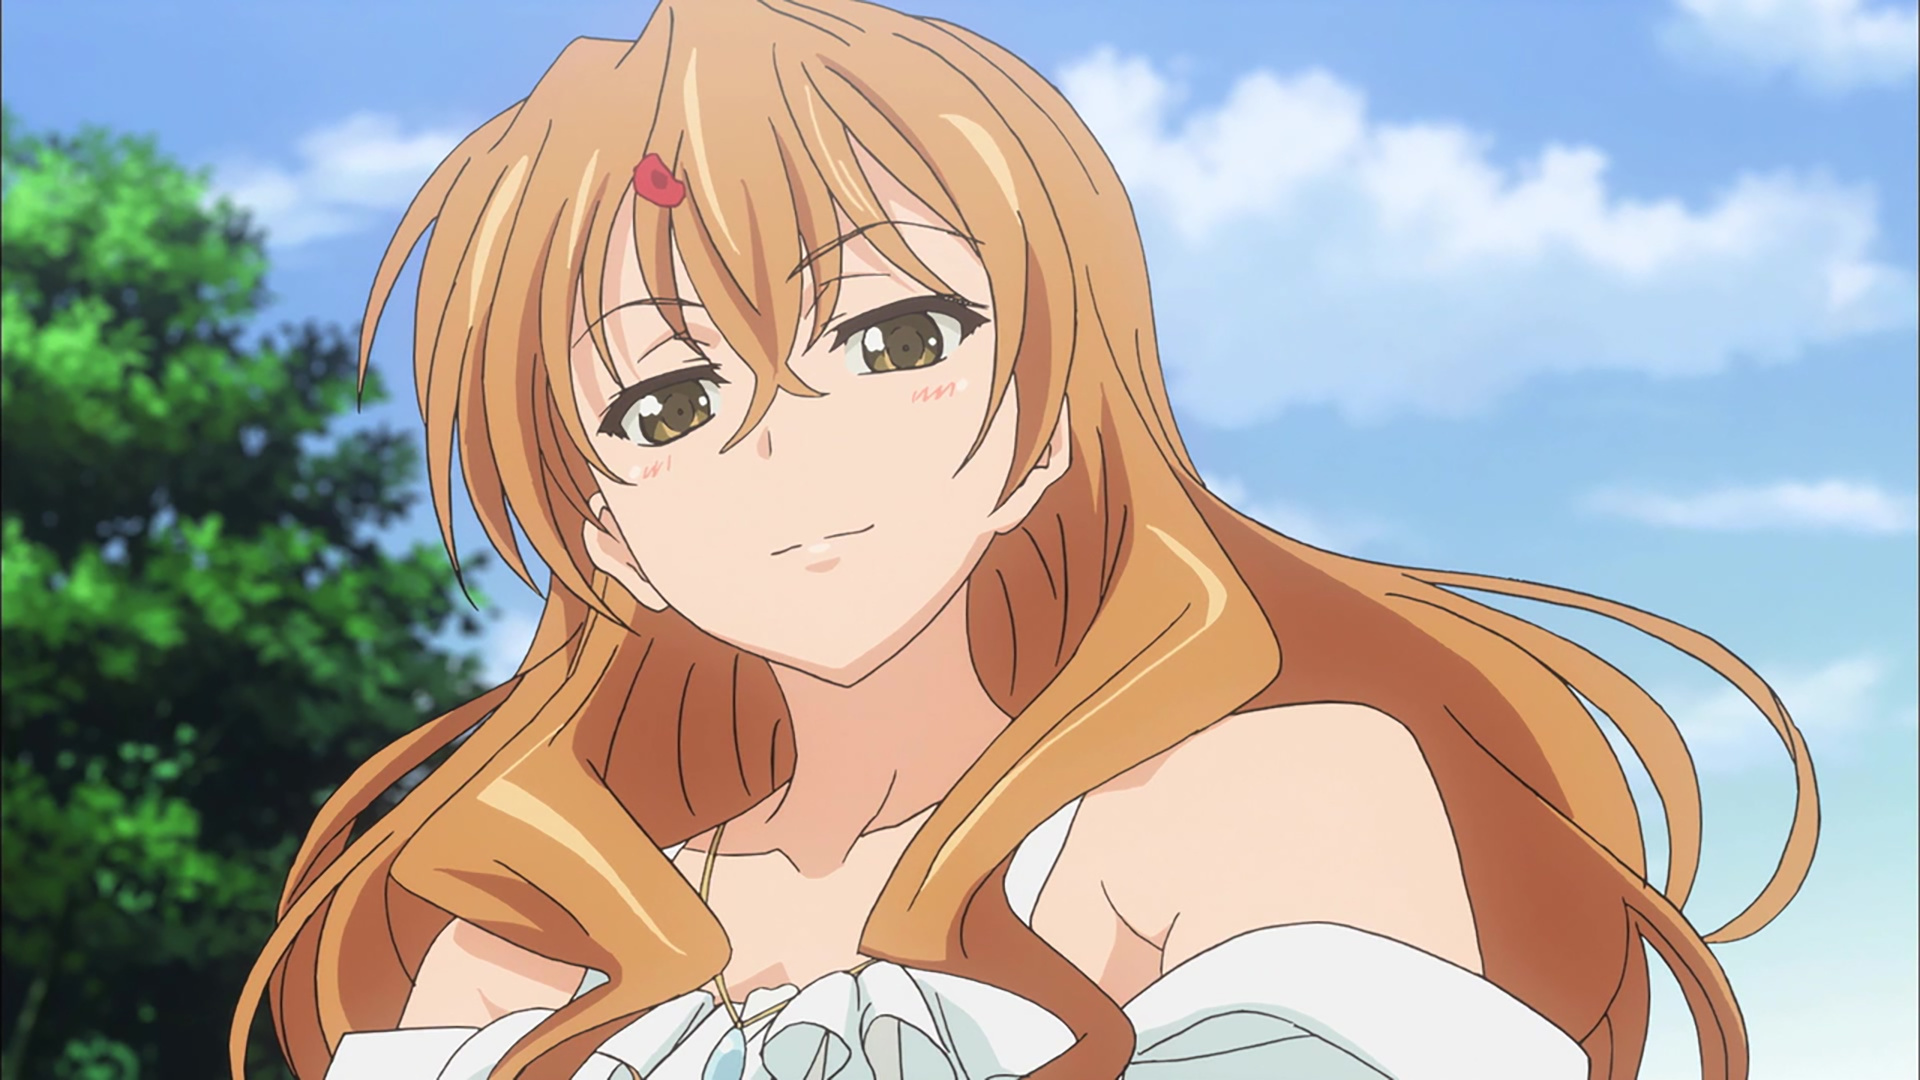 Golden Time (TV Series): Kouko Kaga, A freshman law student who was formerly in love with Mitsuo Yanagisawa. 1920x1080 Full HD Wallpaper.